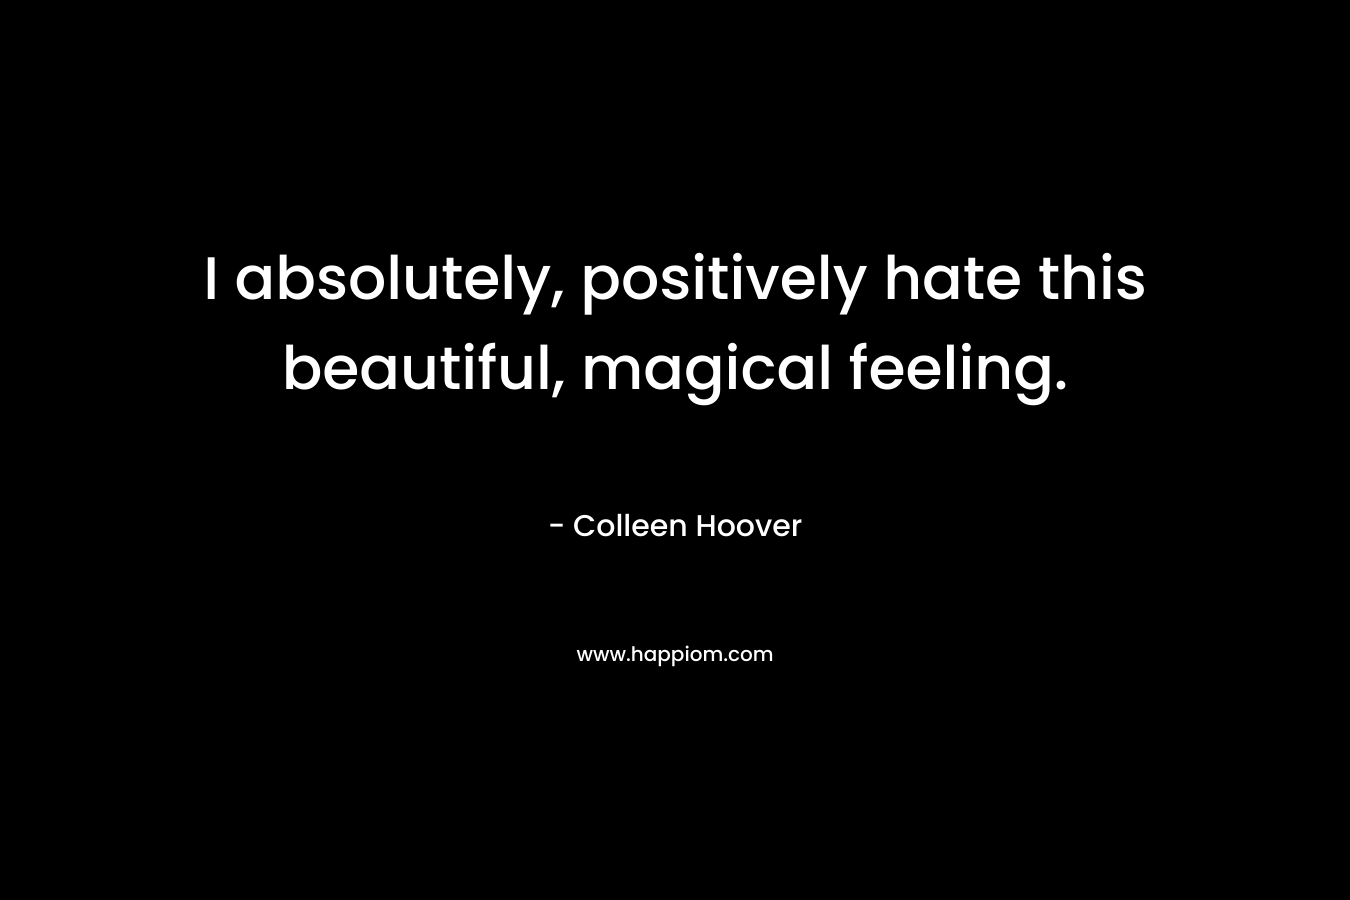 I absolutely, positively hate this beautiful, magical feeling.